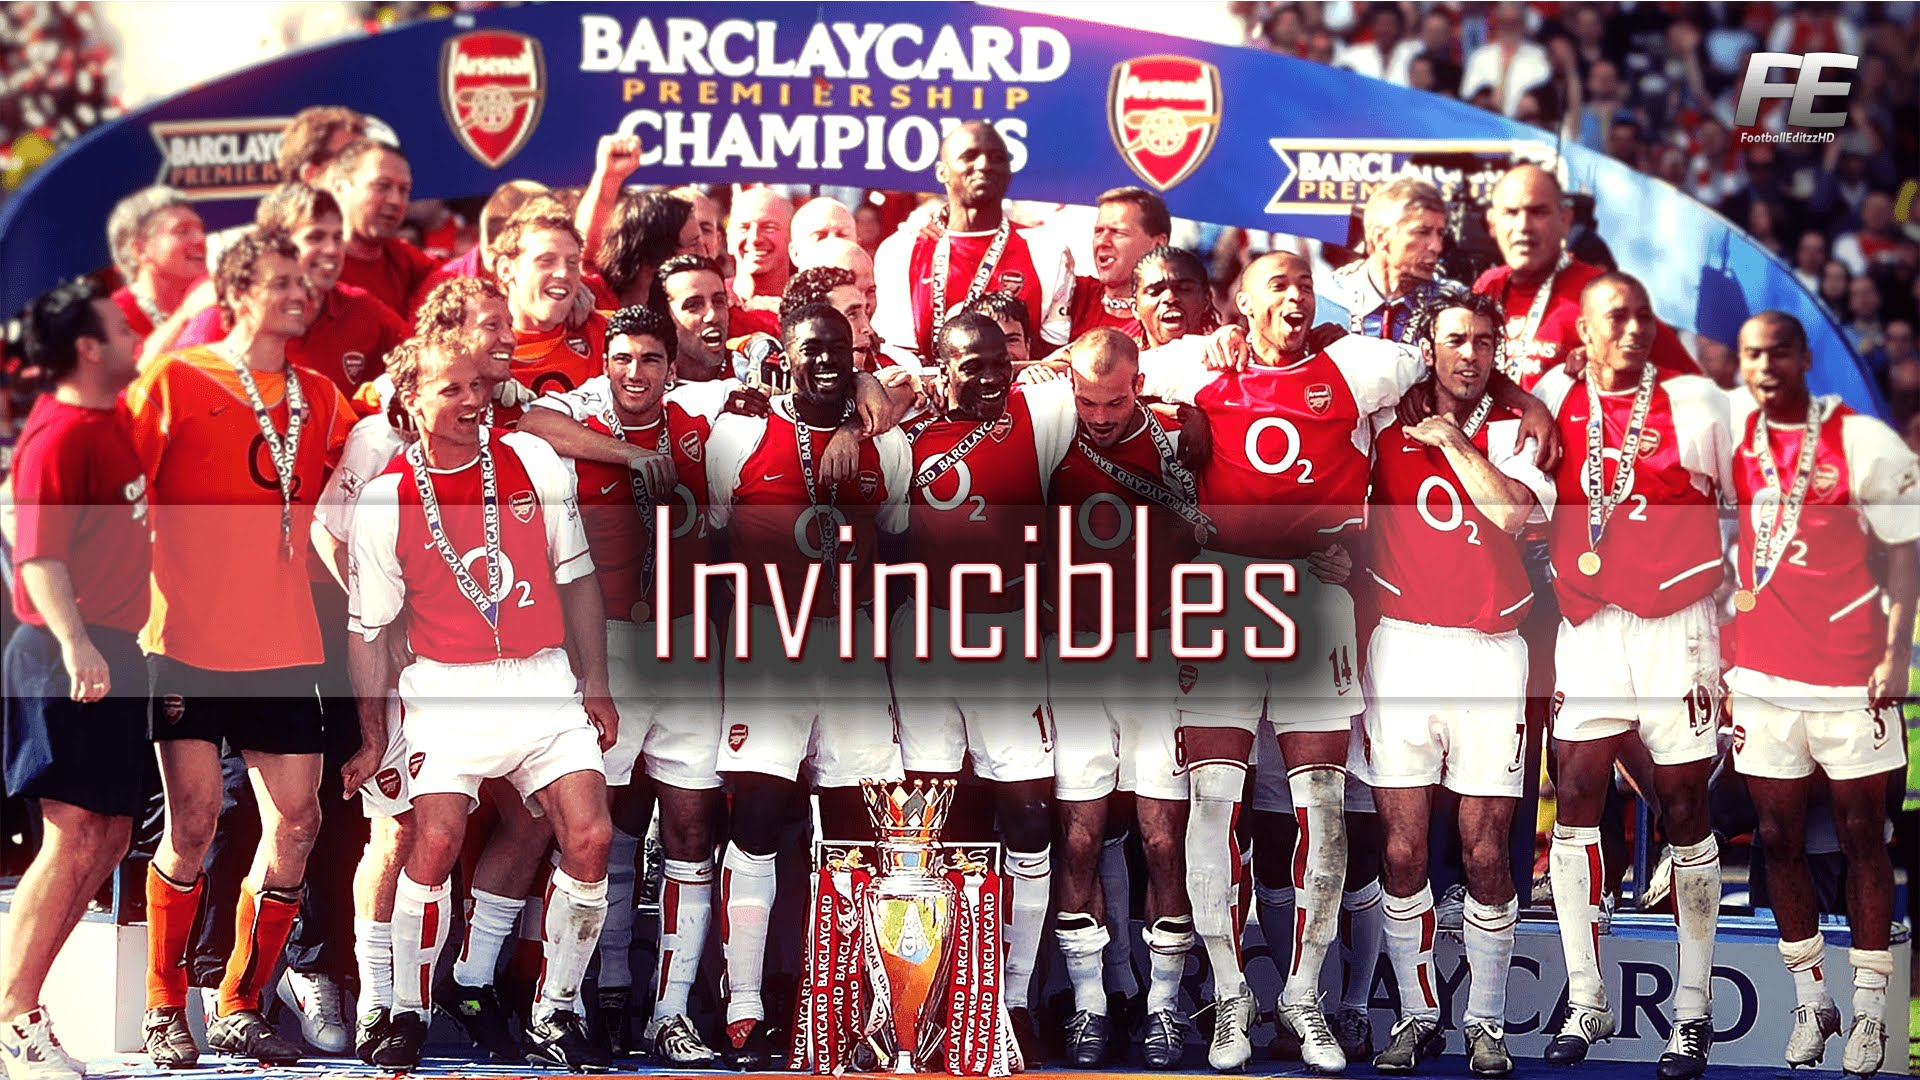 Arsenal's Invincible Record is more successful than current Manchester City Centurions